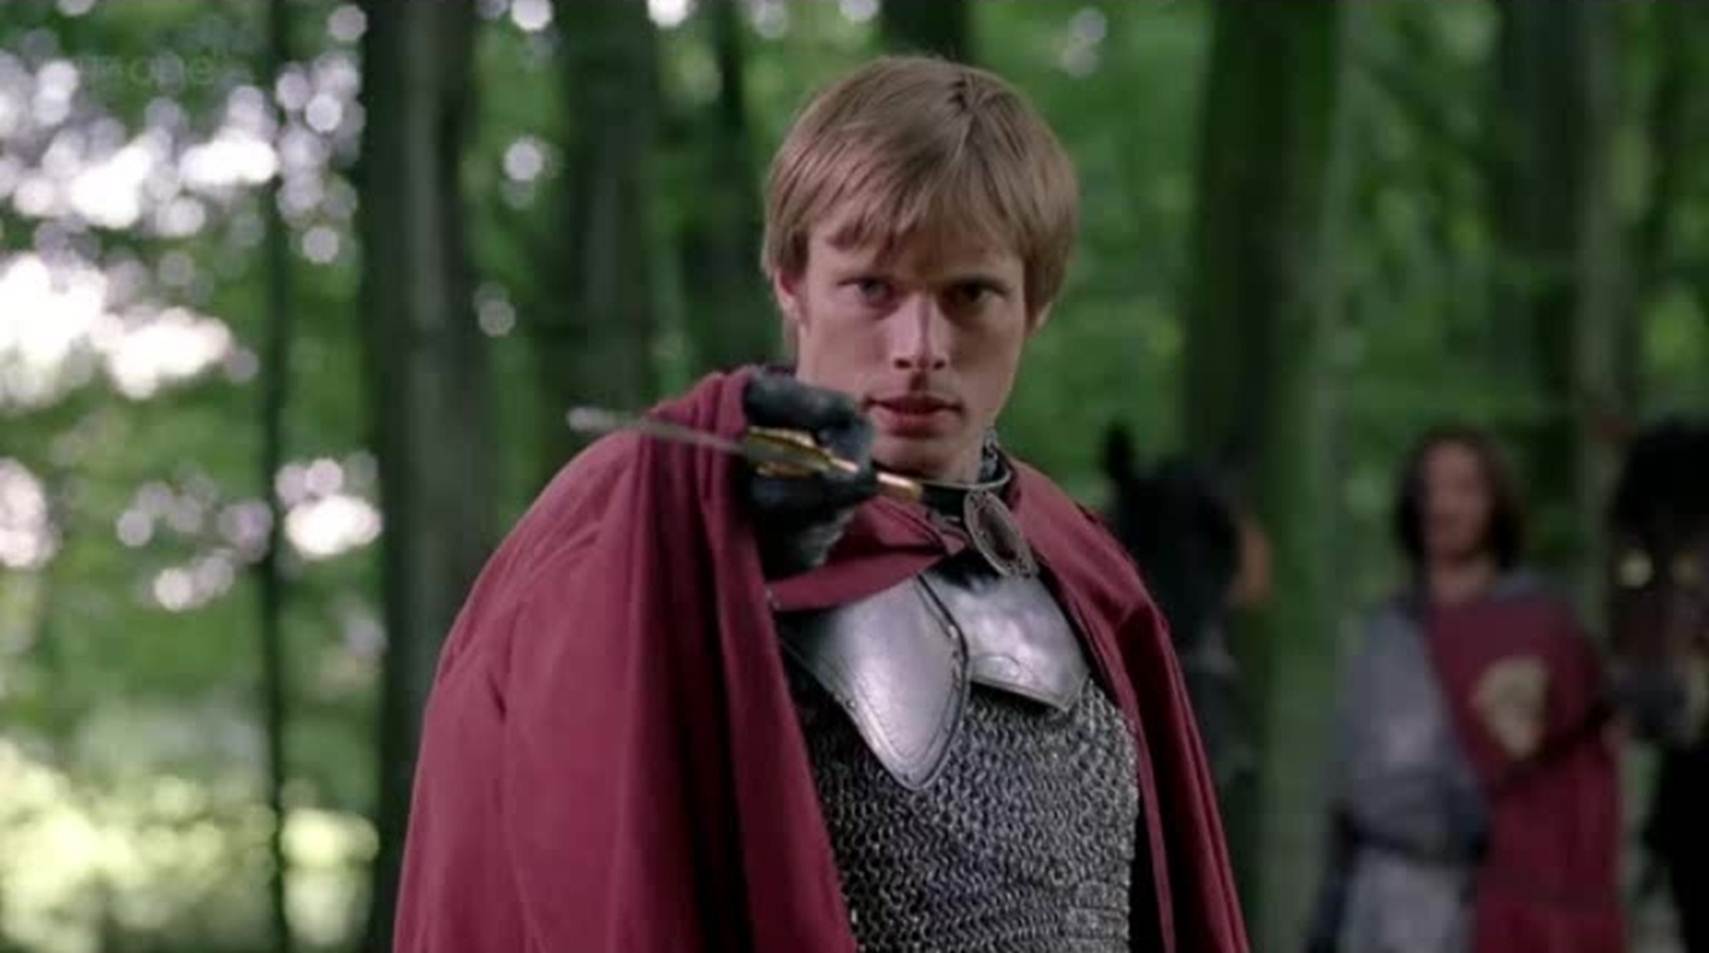 Merlin Characters Images on Fanpop.